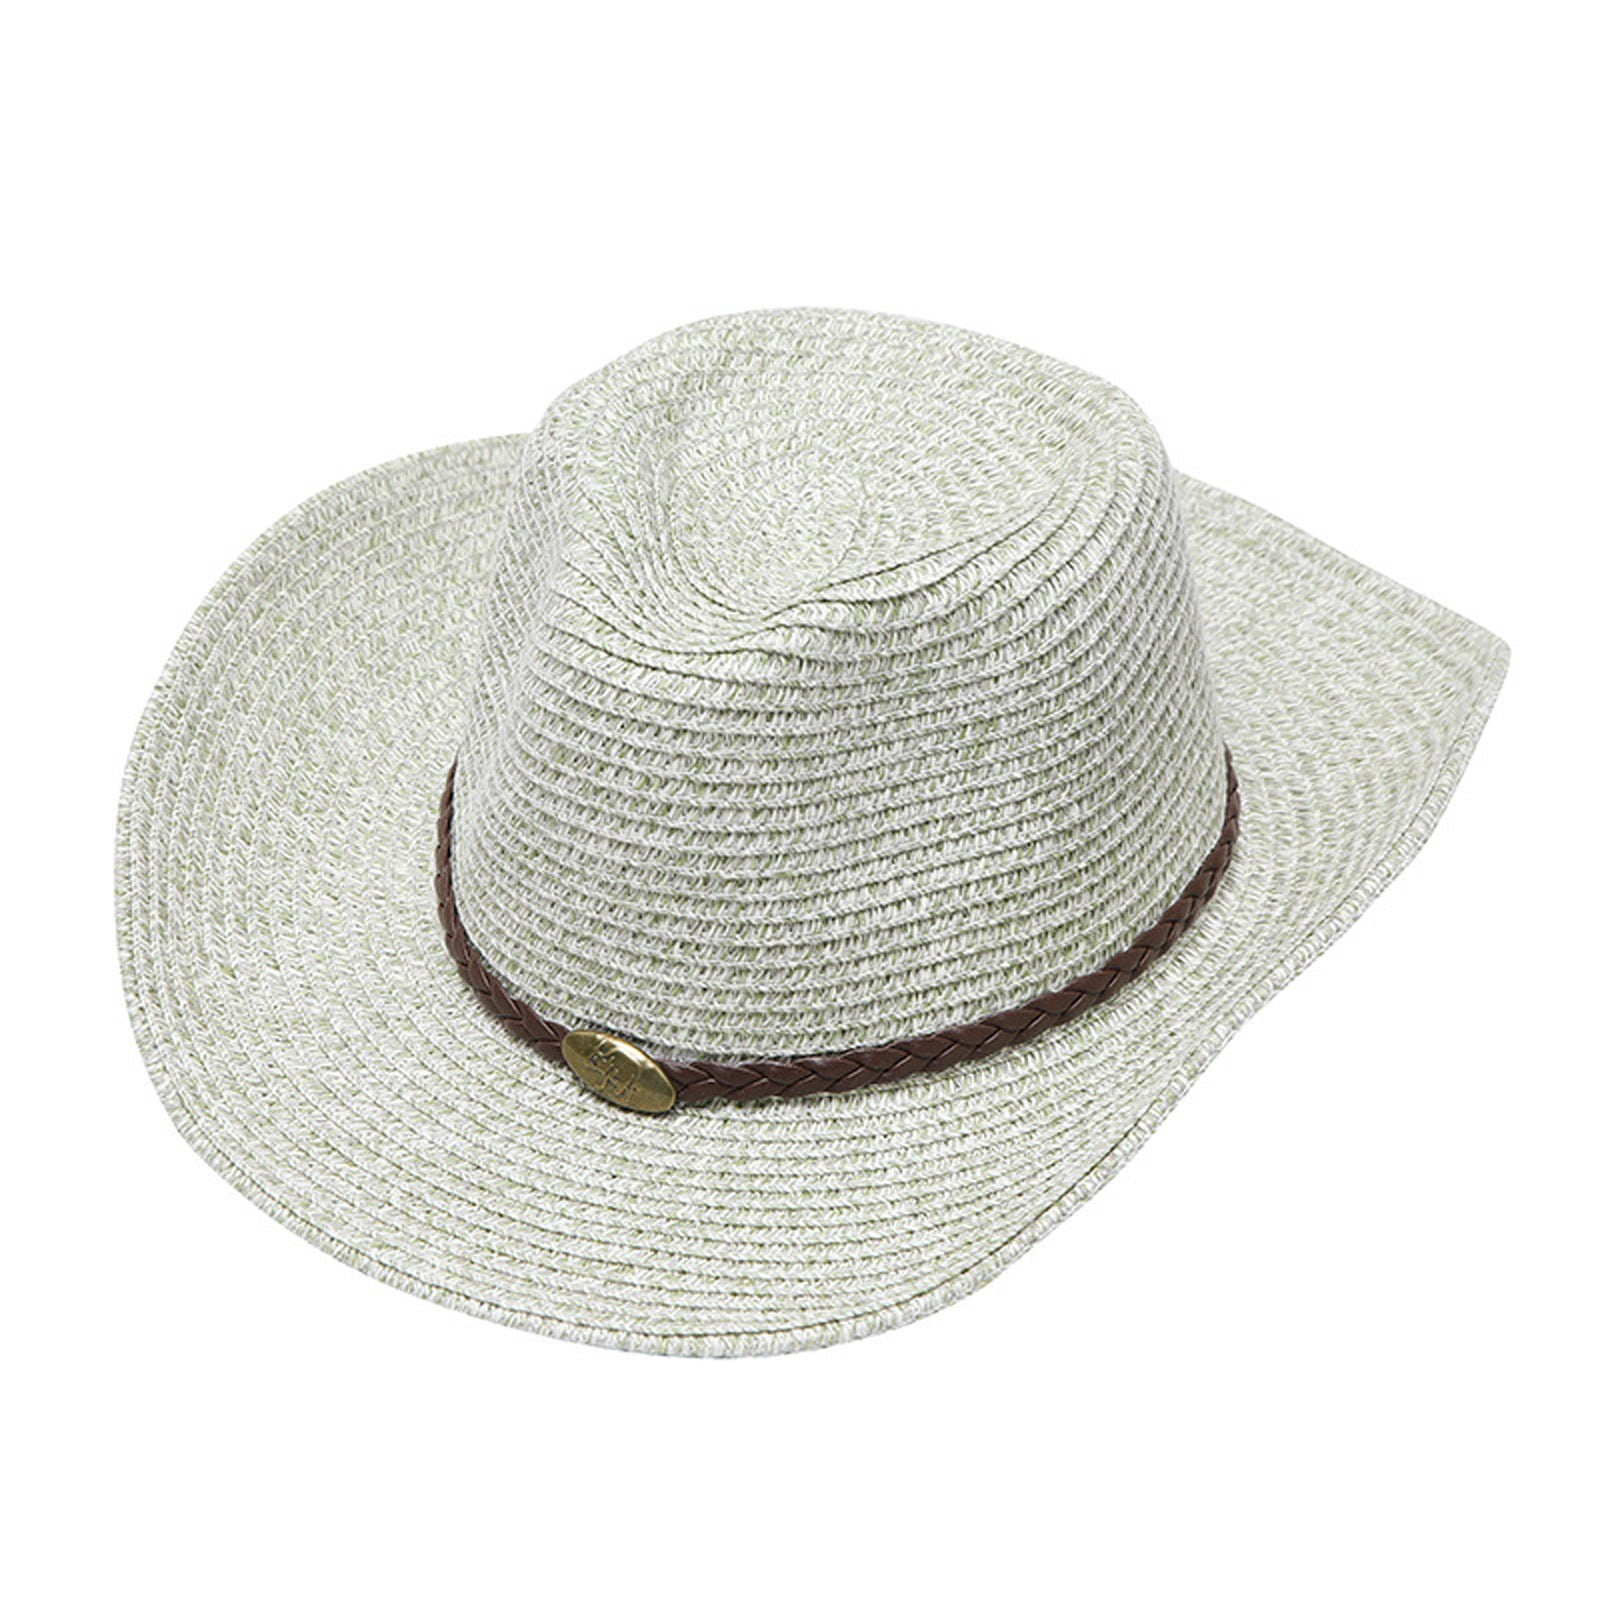 Cathalem Who Took The Farmers Hat adult Casual Solid Summer Western Fashion Cowboy Sun Hat Wide Brim Travel Sun Cap Hat Holsters Hat Grey One size